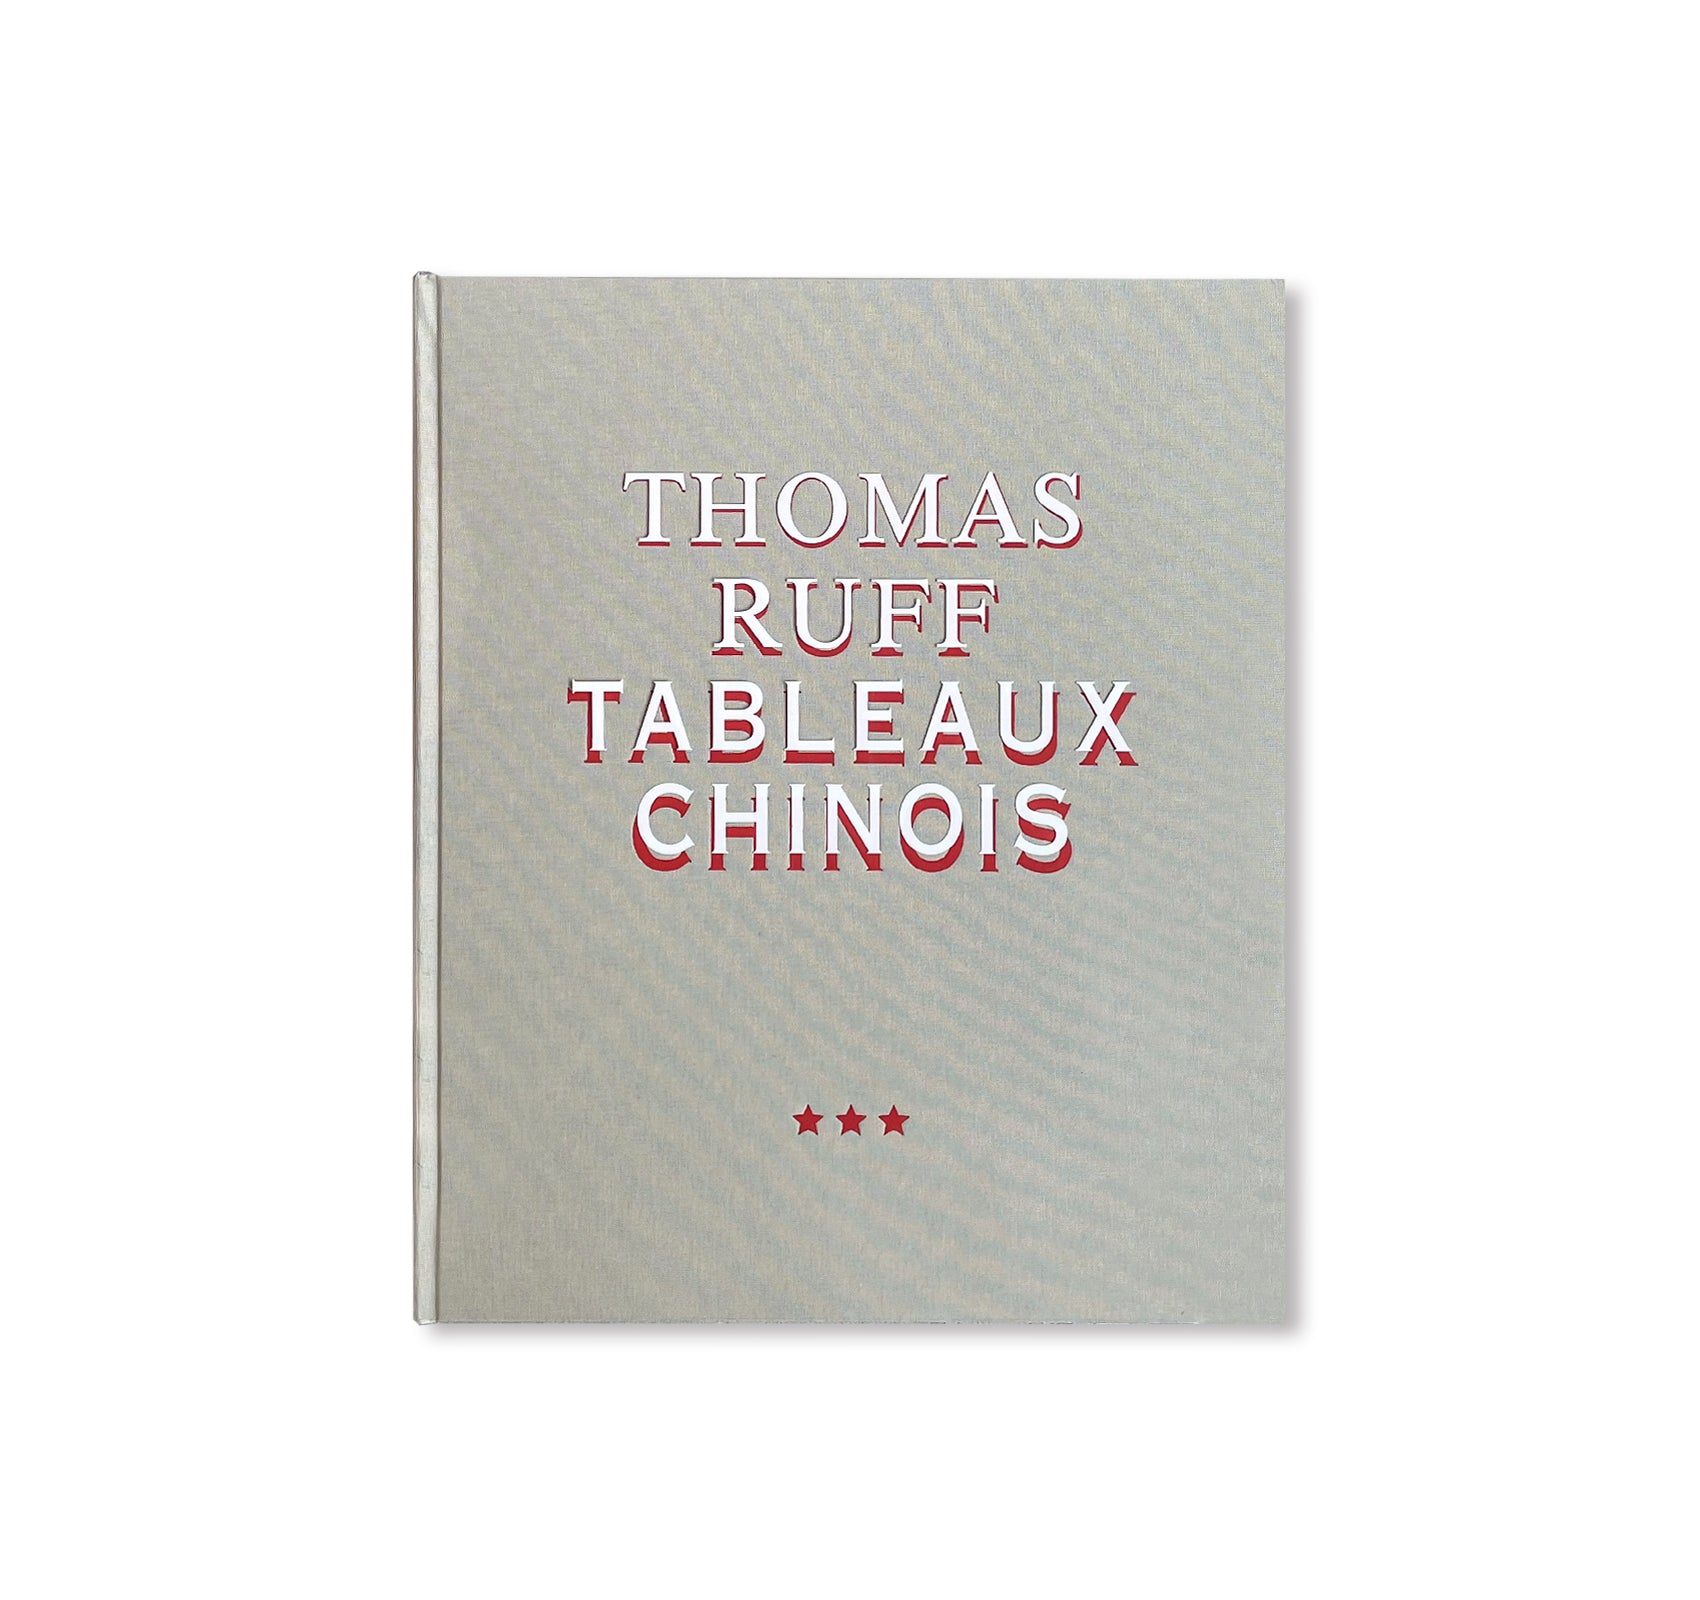 TABLEAUX CHINOIS by Thomas Ruff